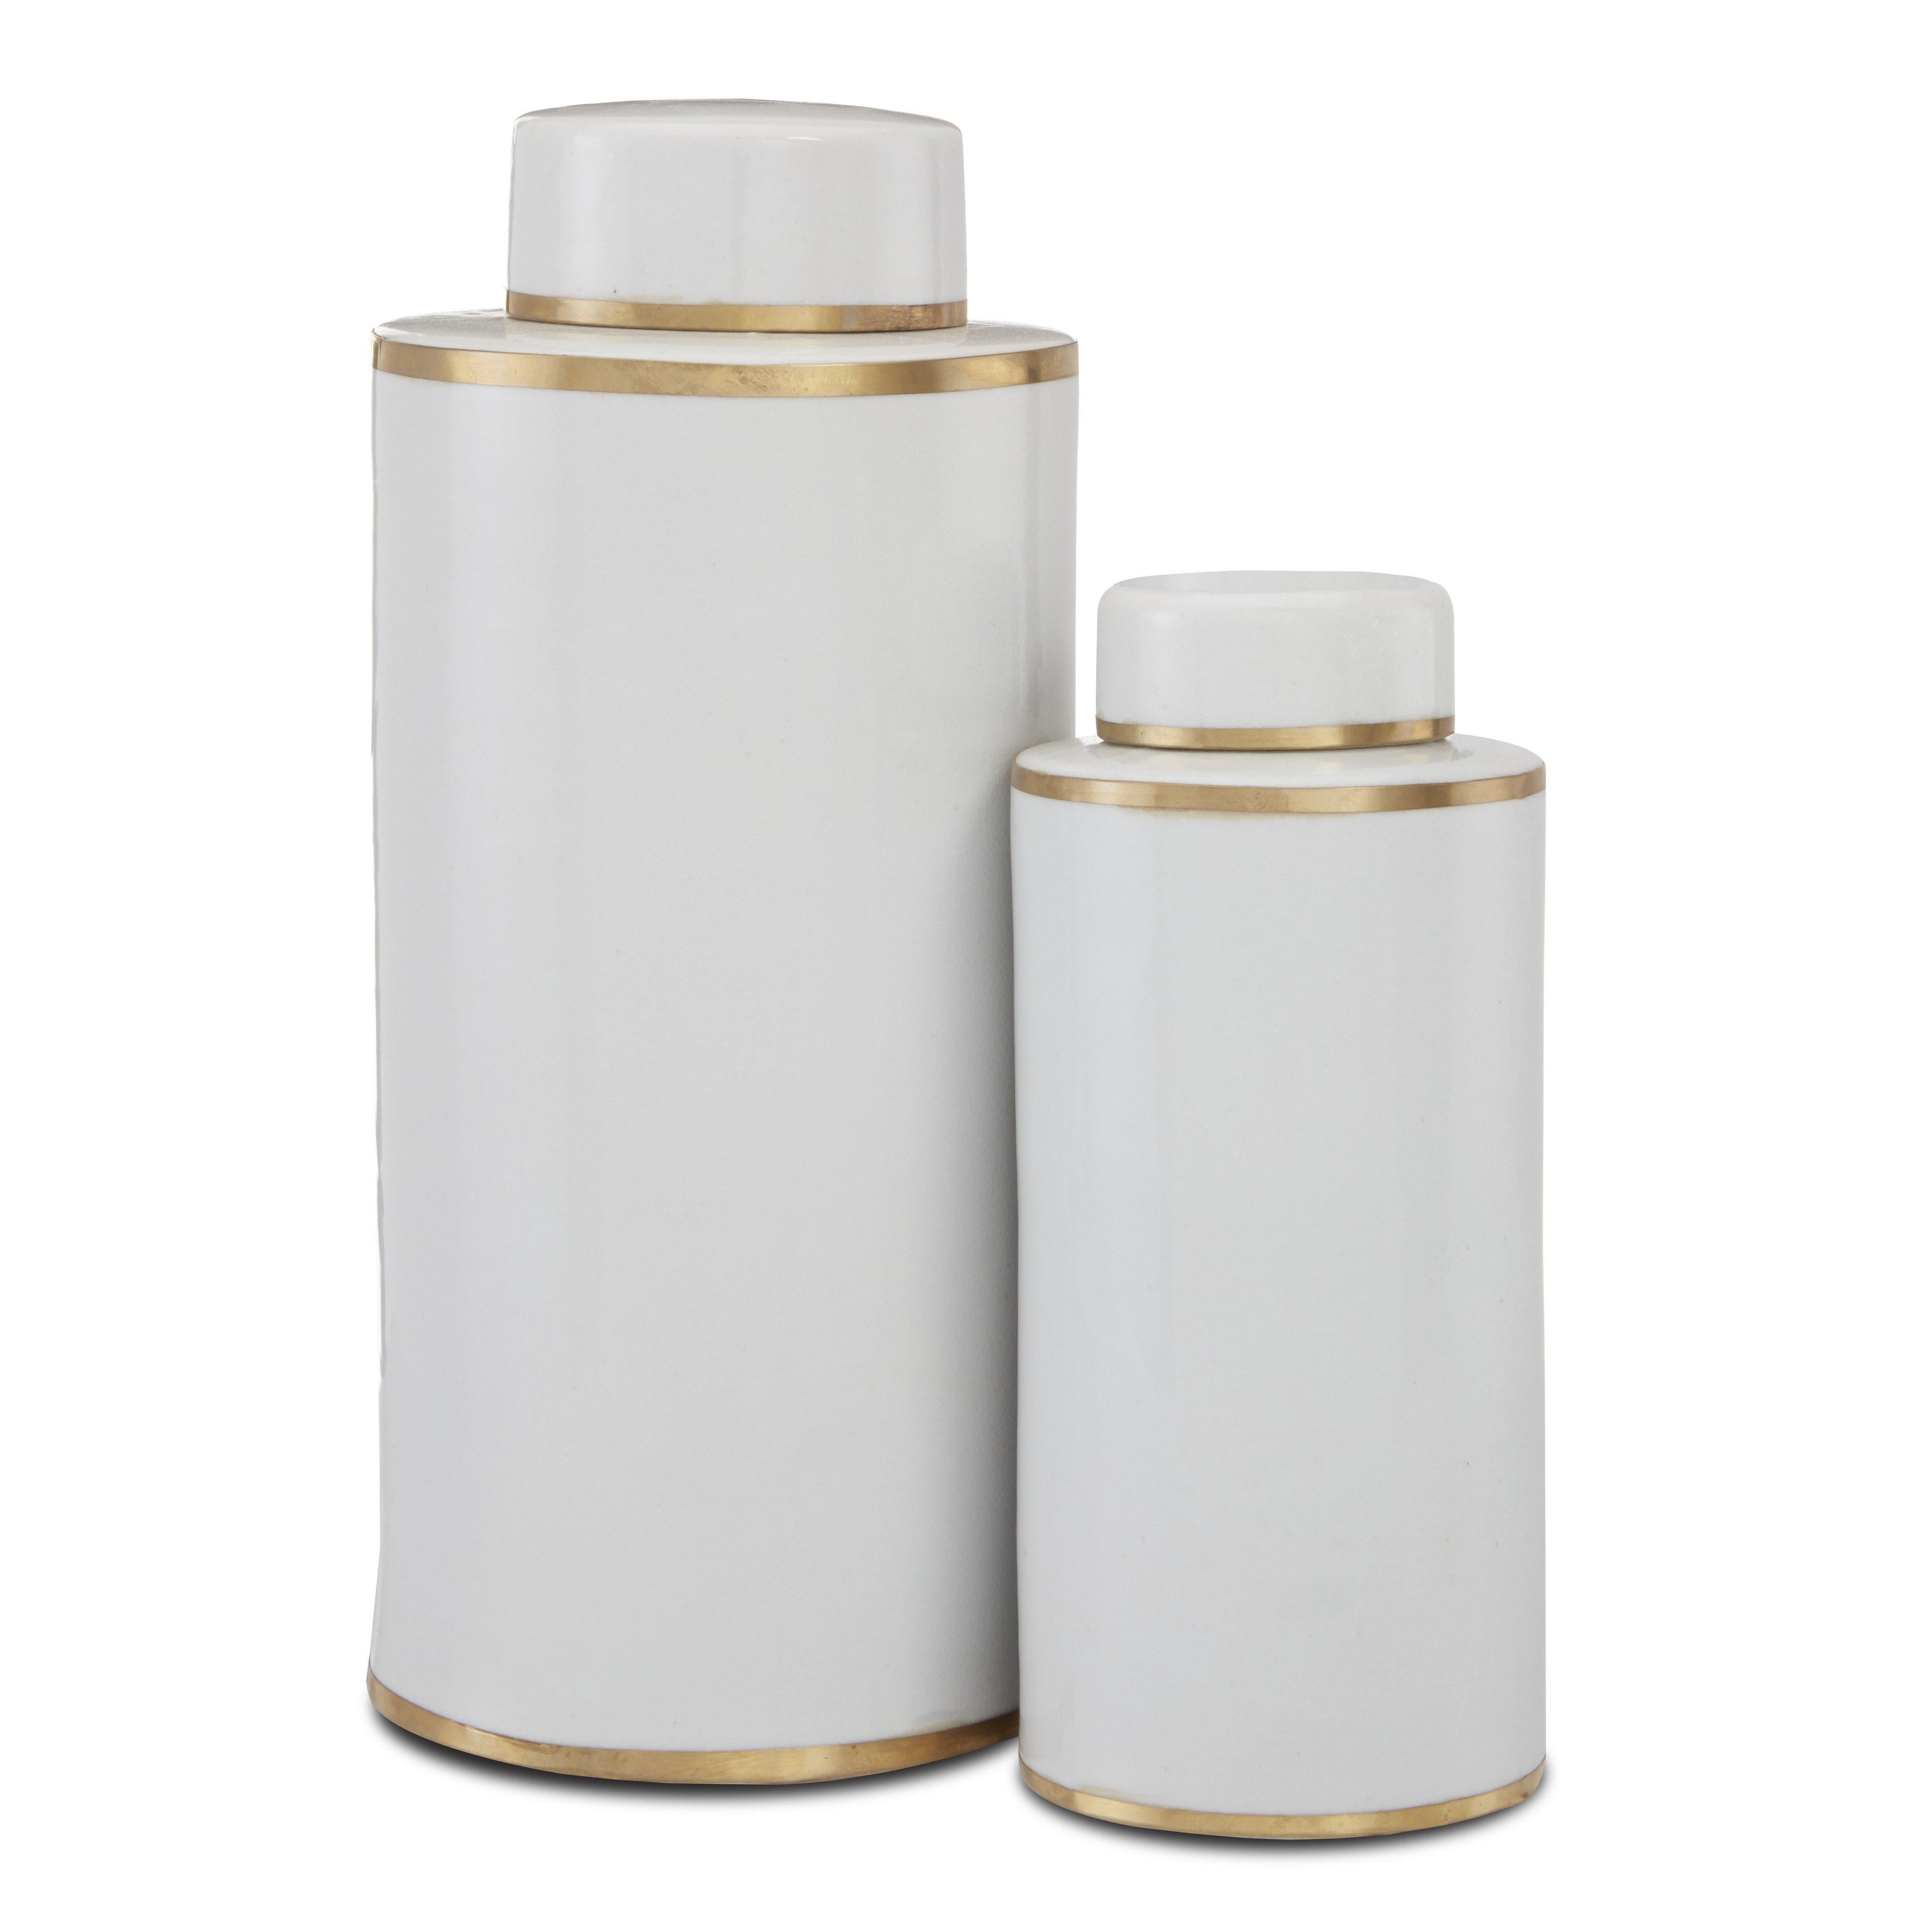 Currey and Company - Ivory Canister Set of 2 - 1200-0414 | Montreal Lighting & Hardware